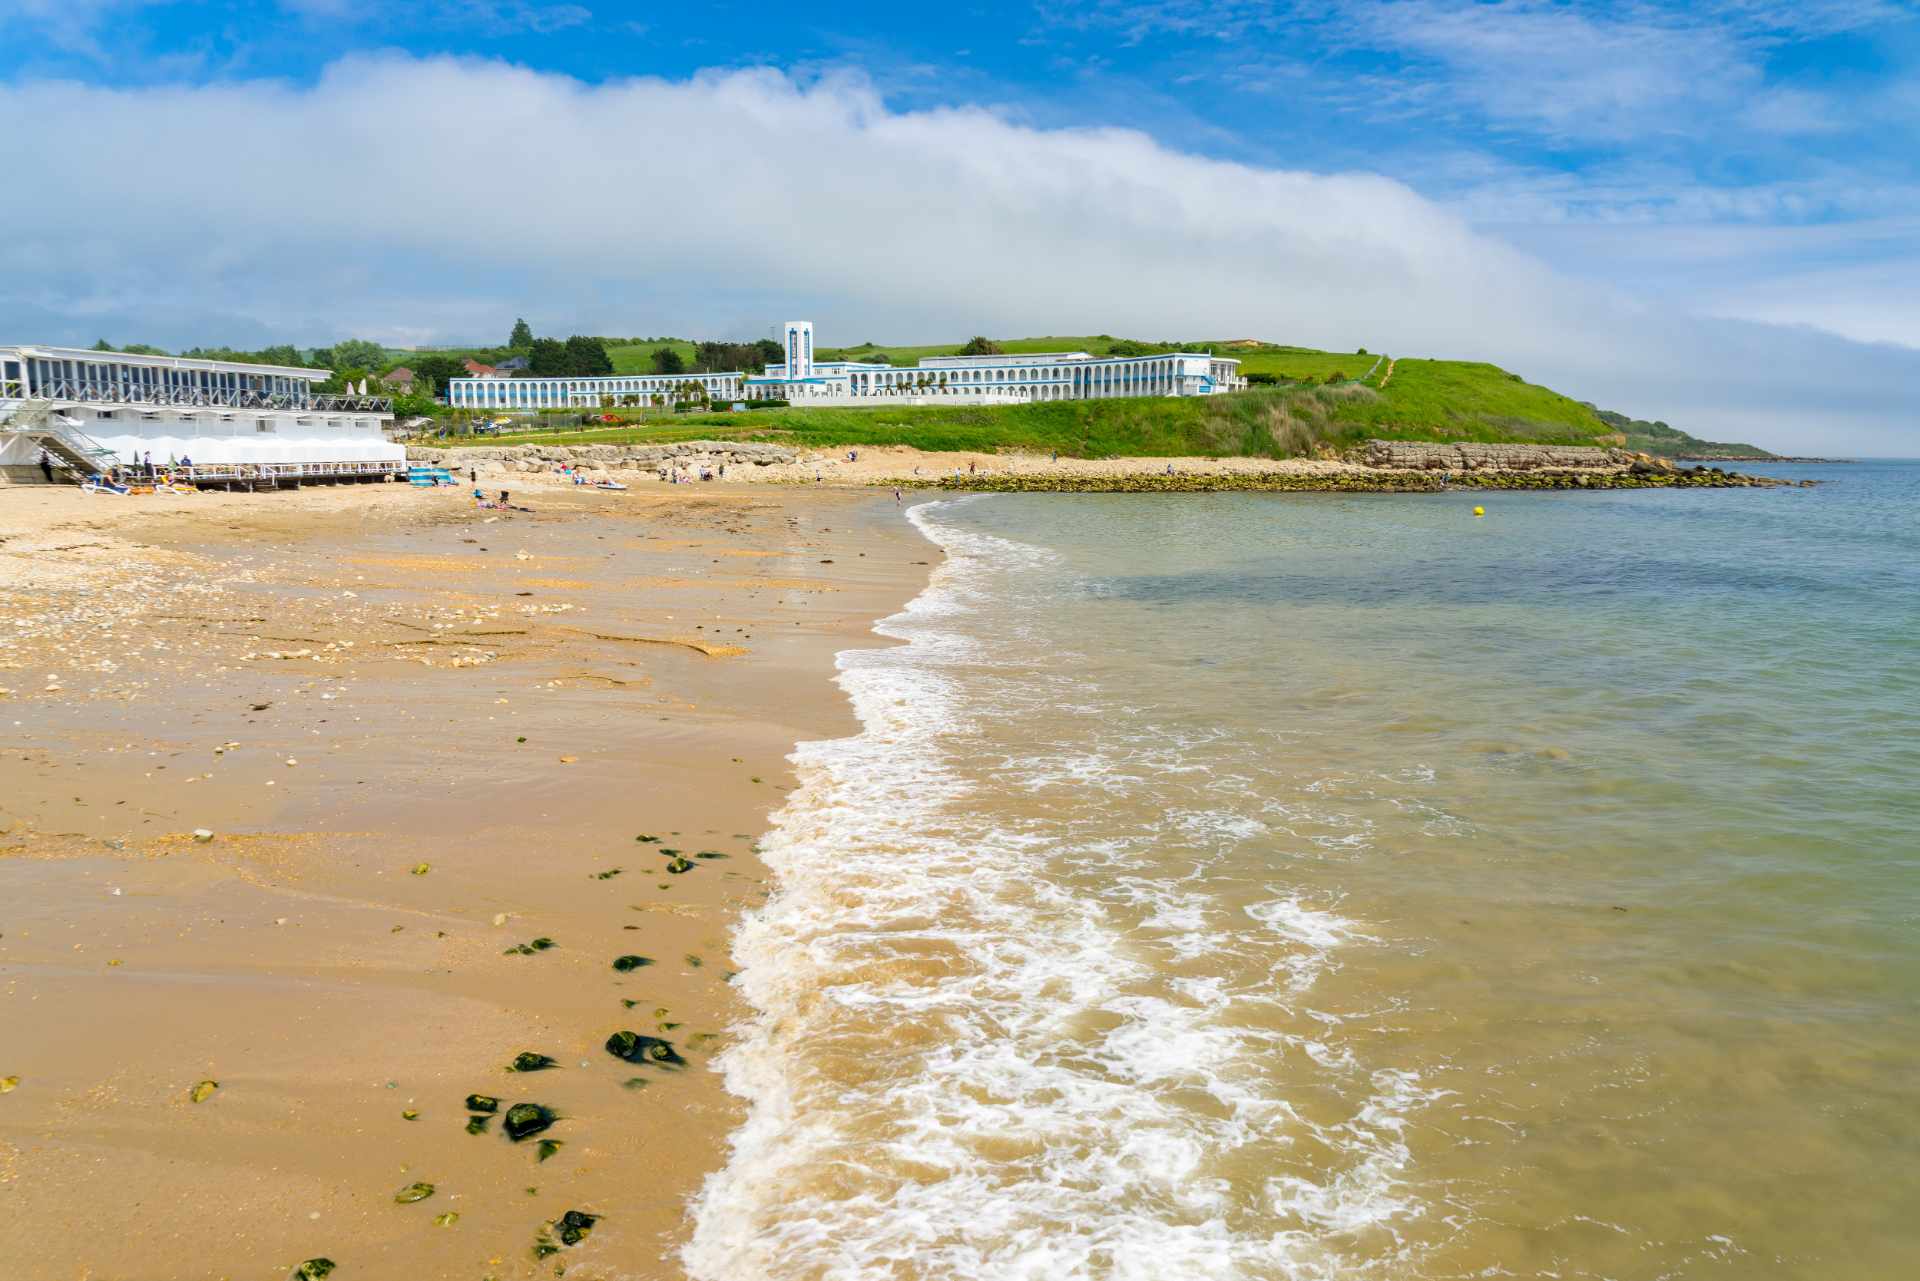 beach-with-buildings-and-hill-in-background-bowleaze-cove